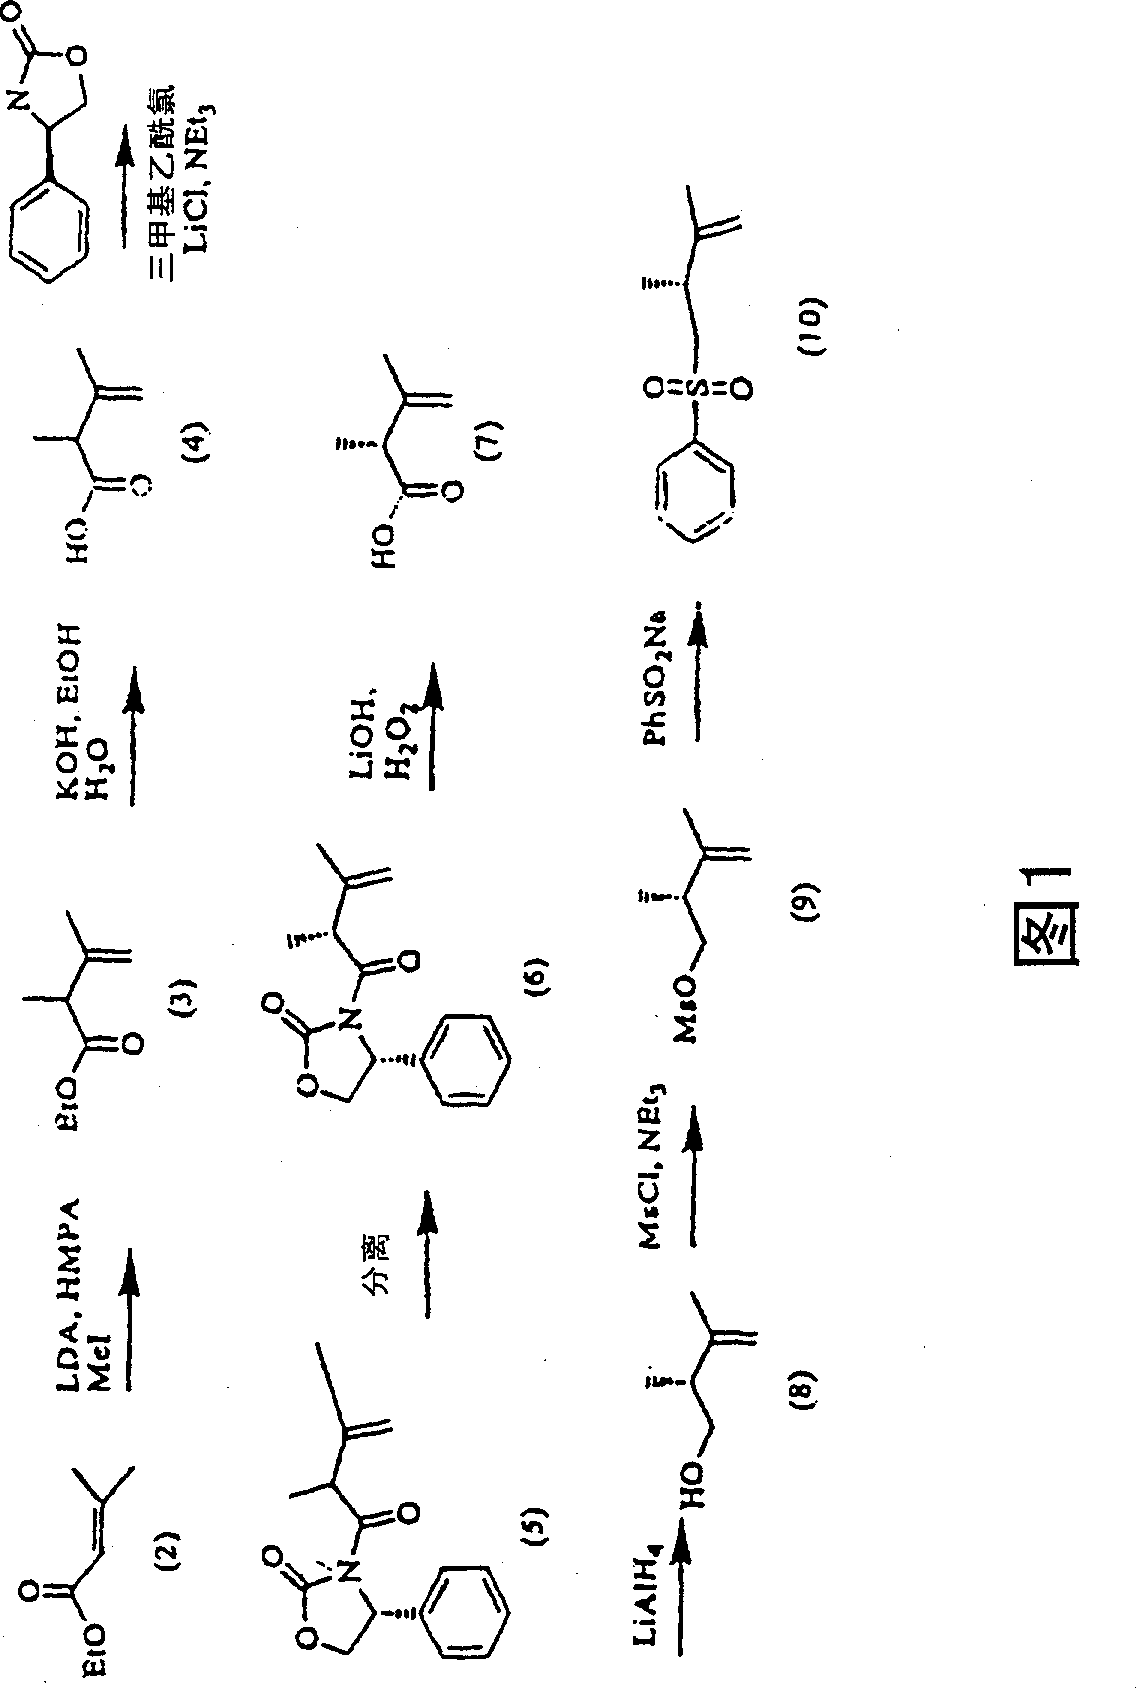 Method for making hydroxy-25-ene-vitamin D compounds